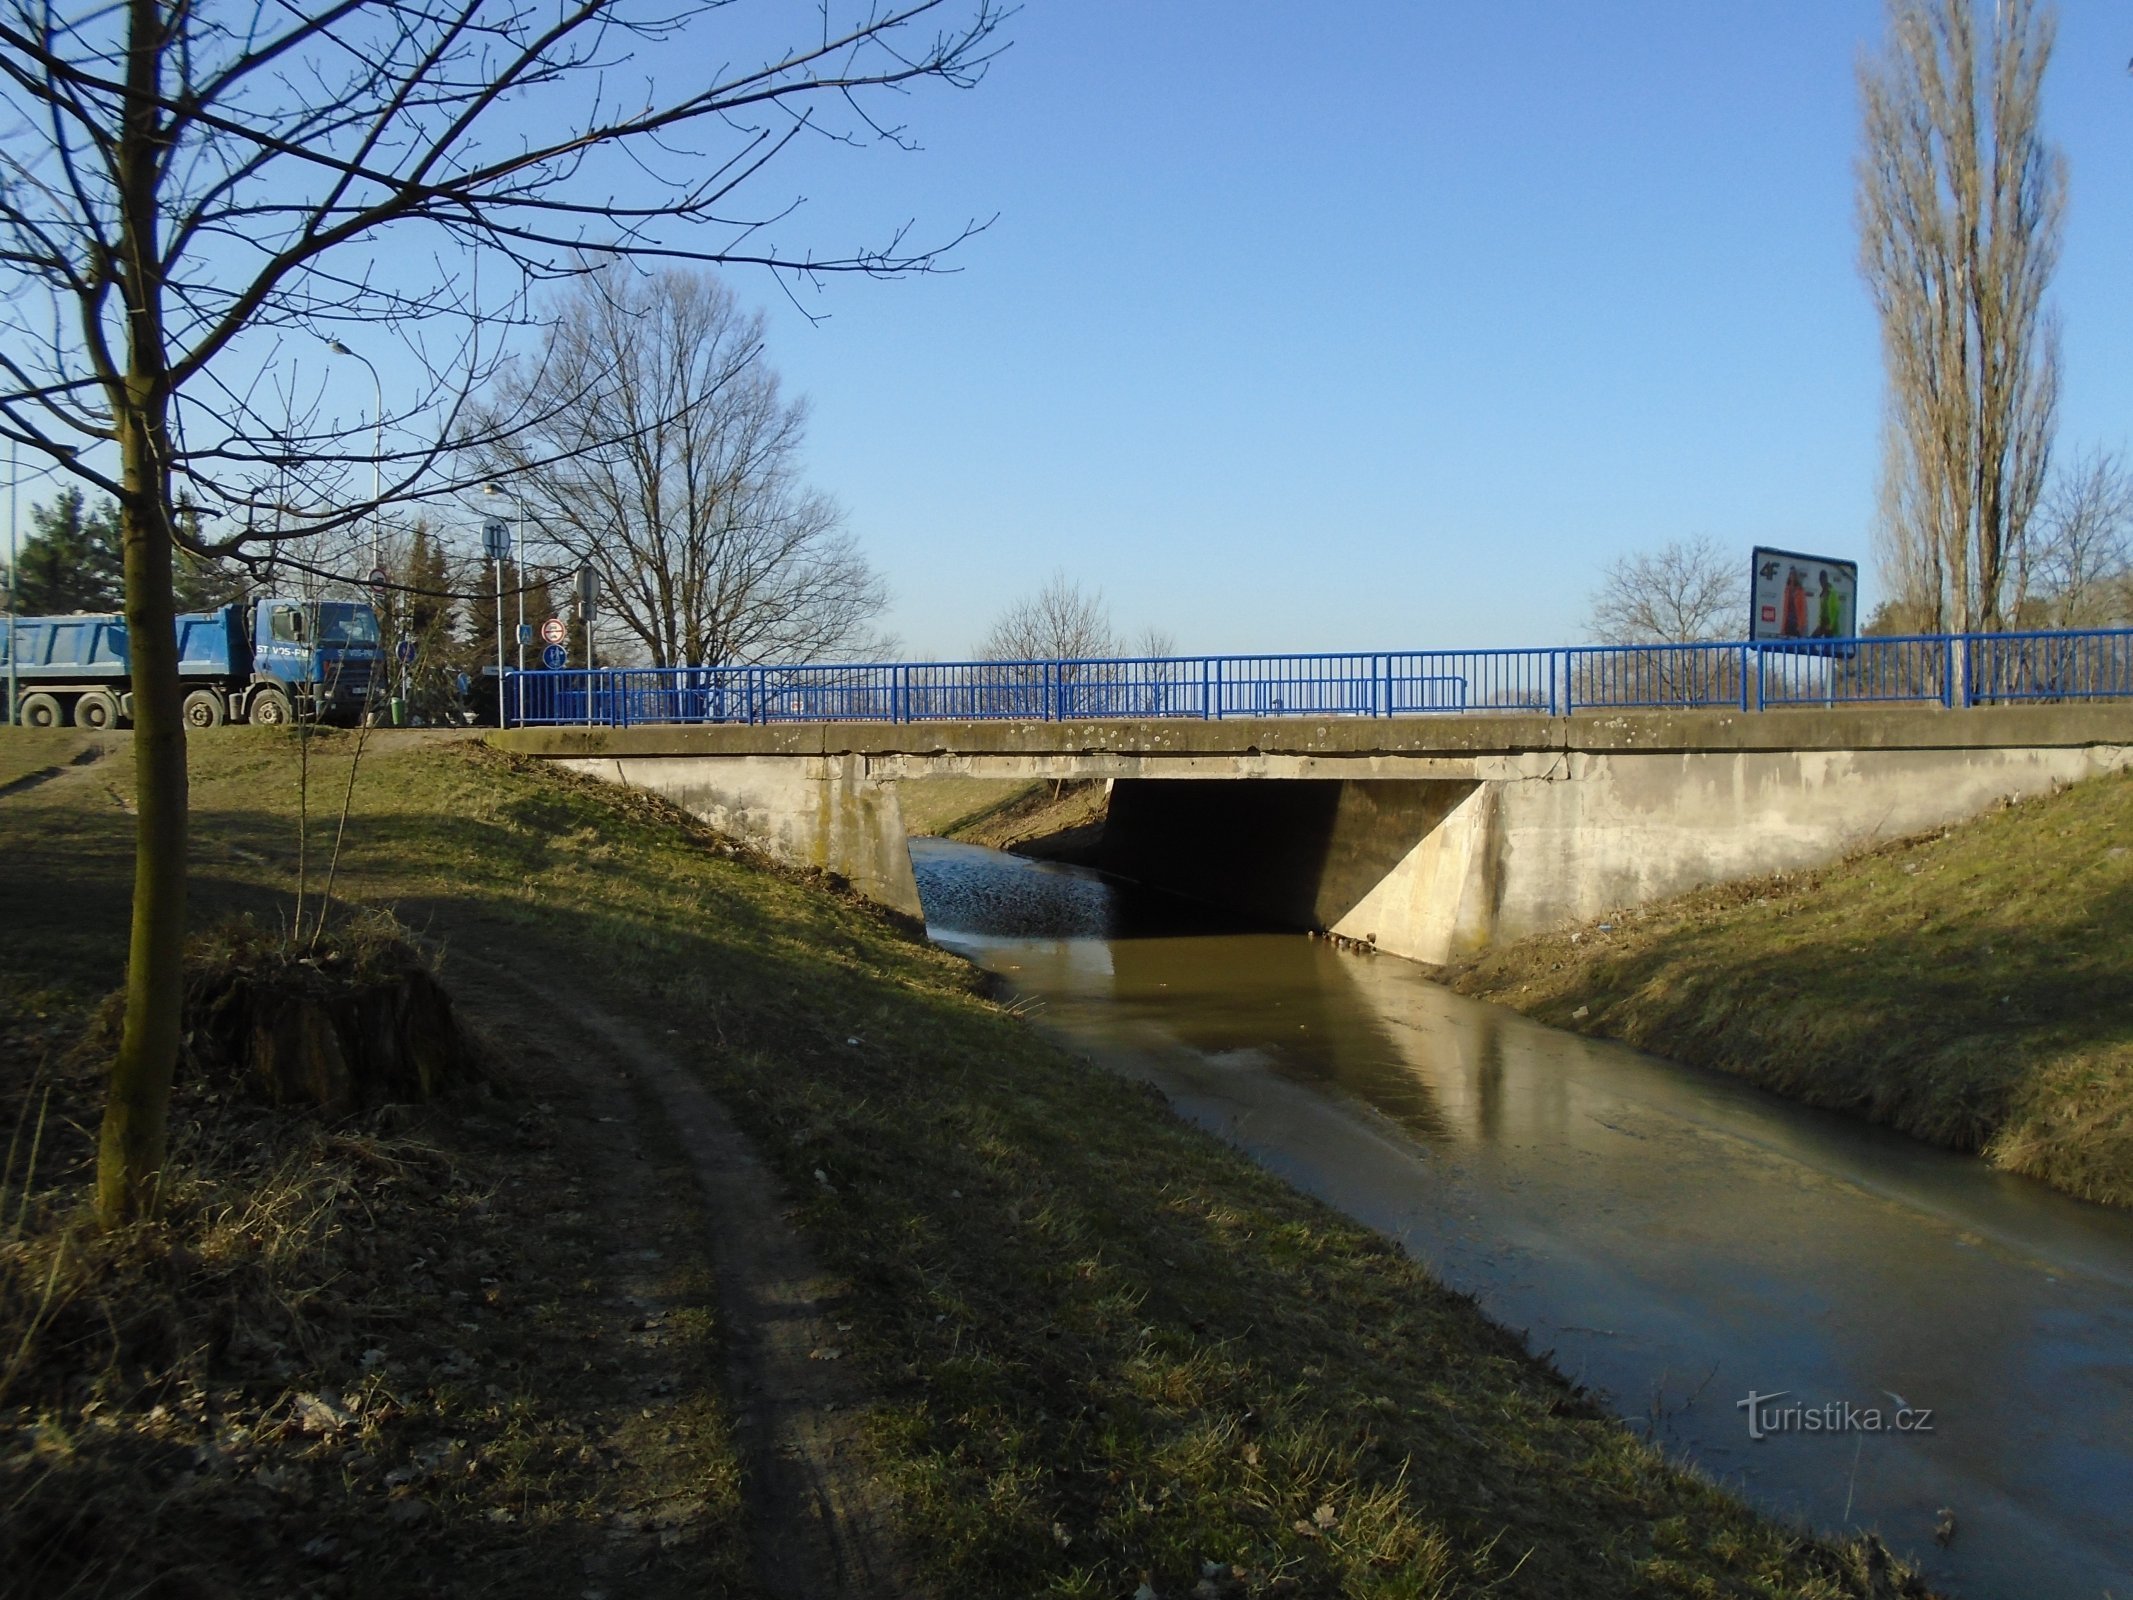 The bridge over the Piletický stream between Silesian Suburb and Pouchov